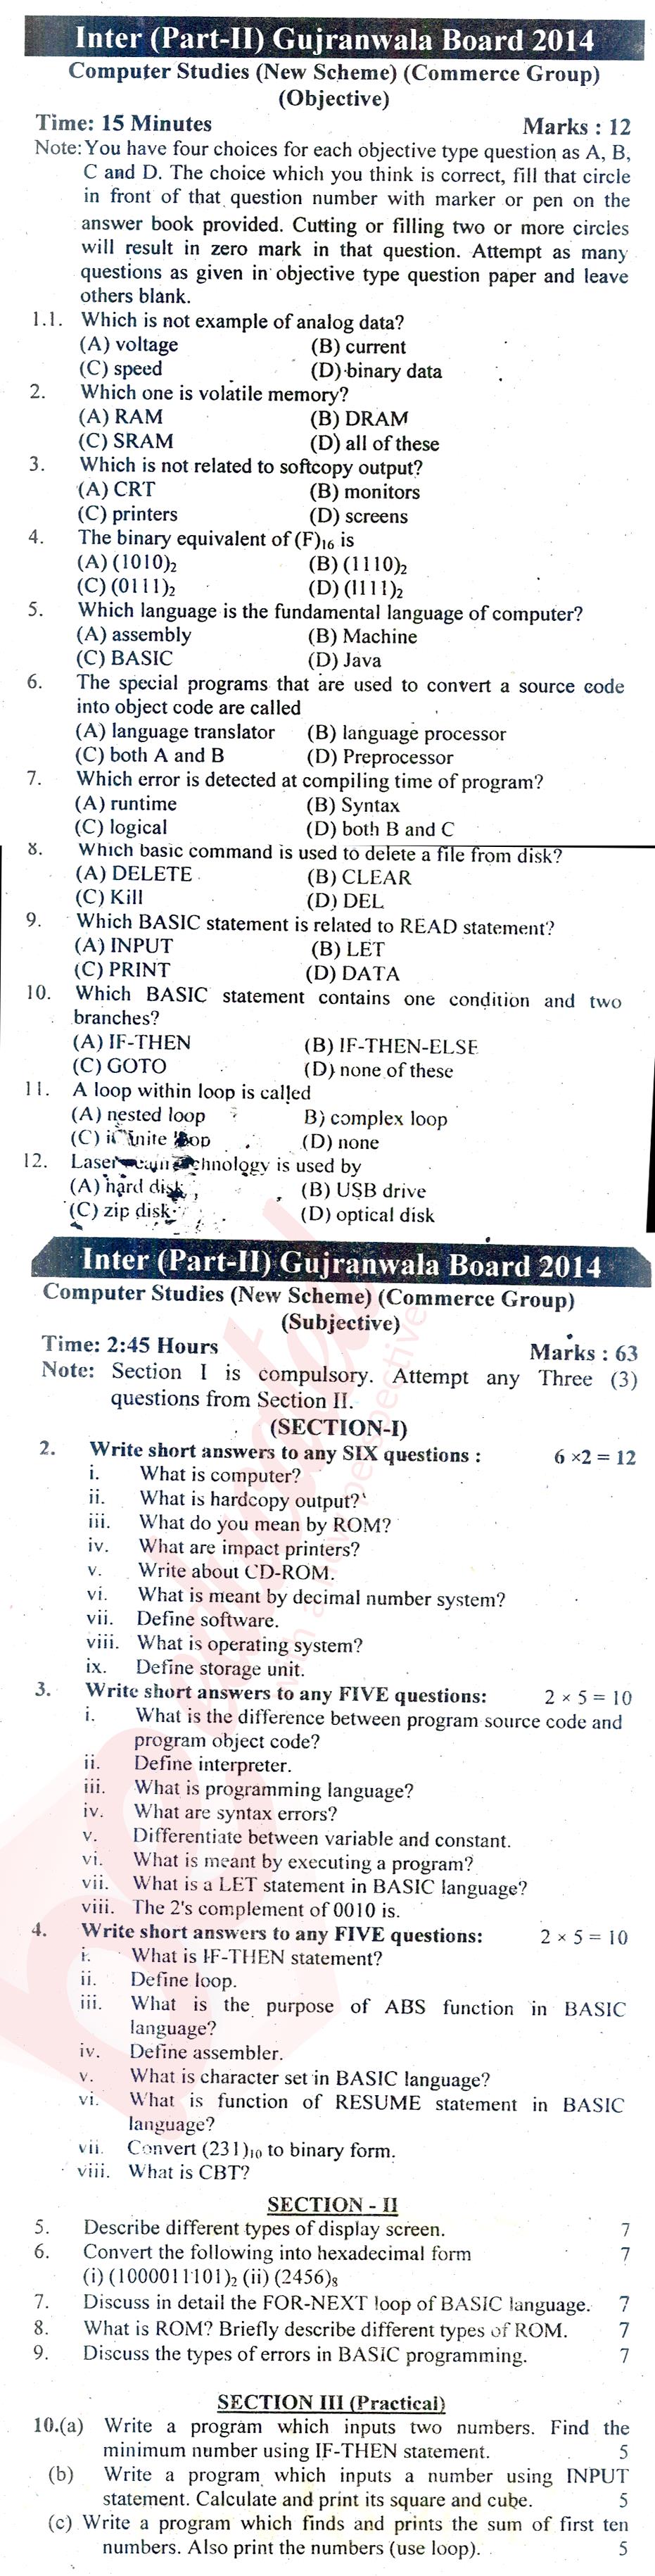 Computer Science ICOM Part 2 Past Paper Group 1 BISE Gujranwala 2014